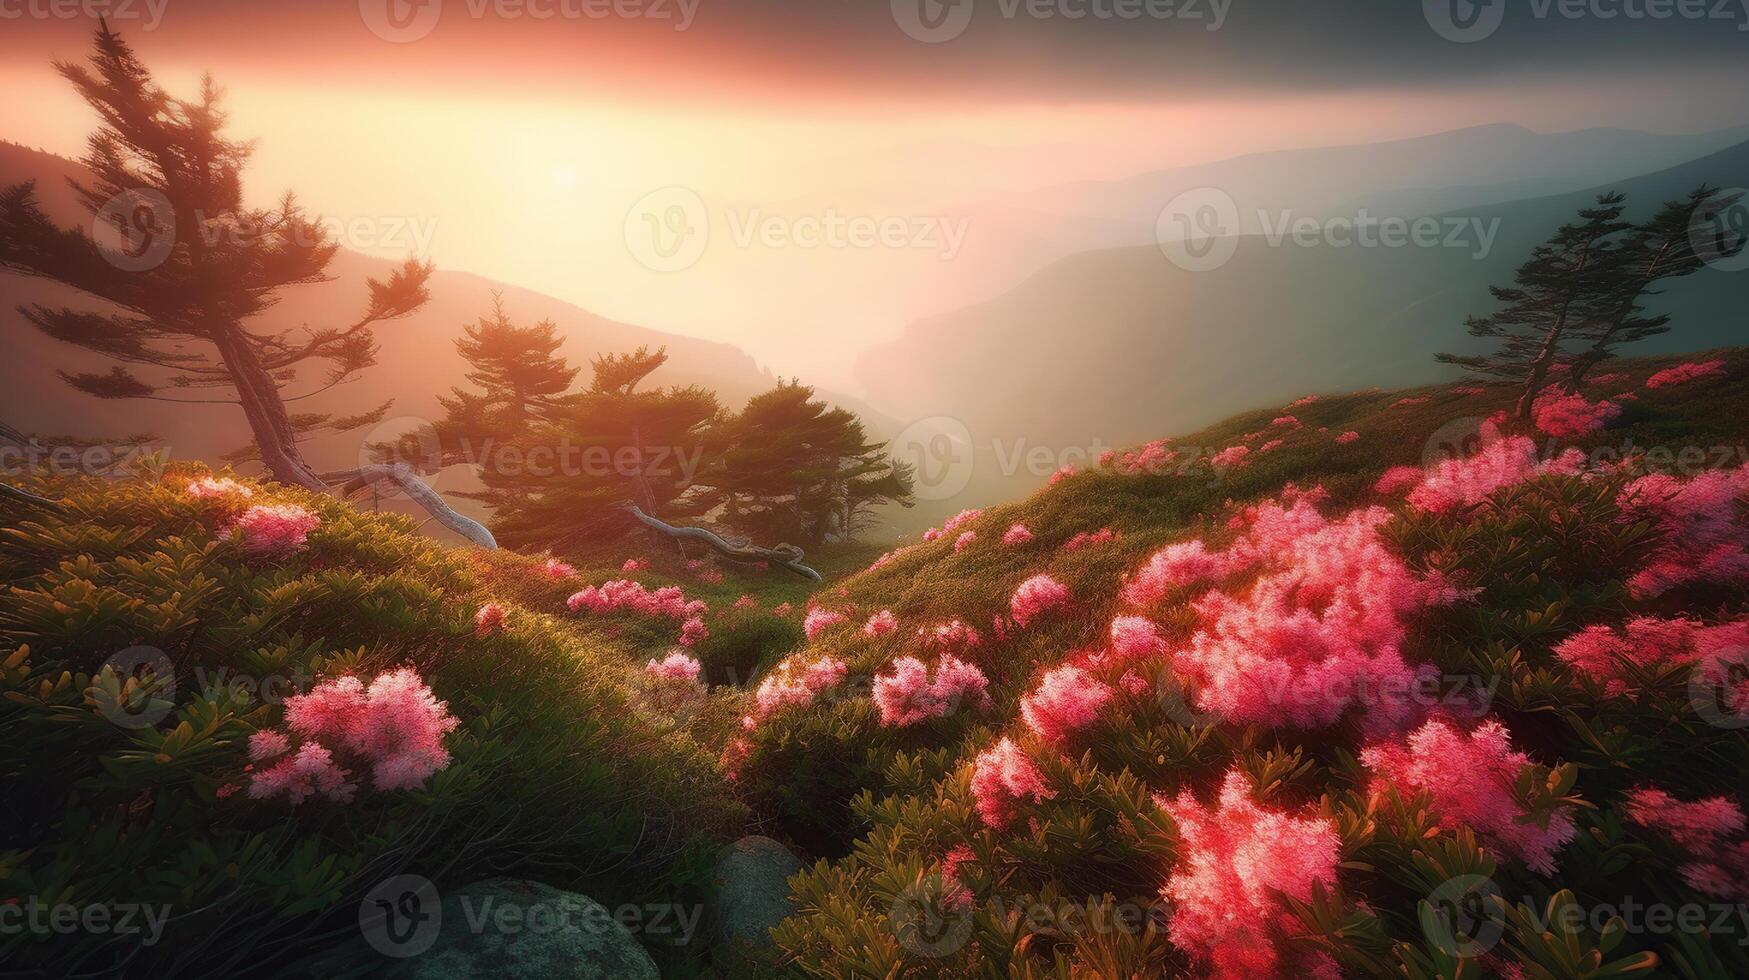 Breathtaking nature scenery during sunset. Incredible foggy morning in mountains with amazing pink rhododenndron flovers. Picture of wild area, photo